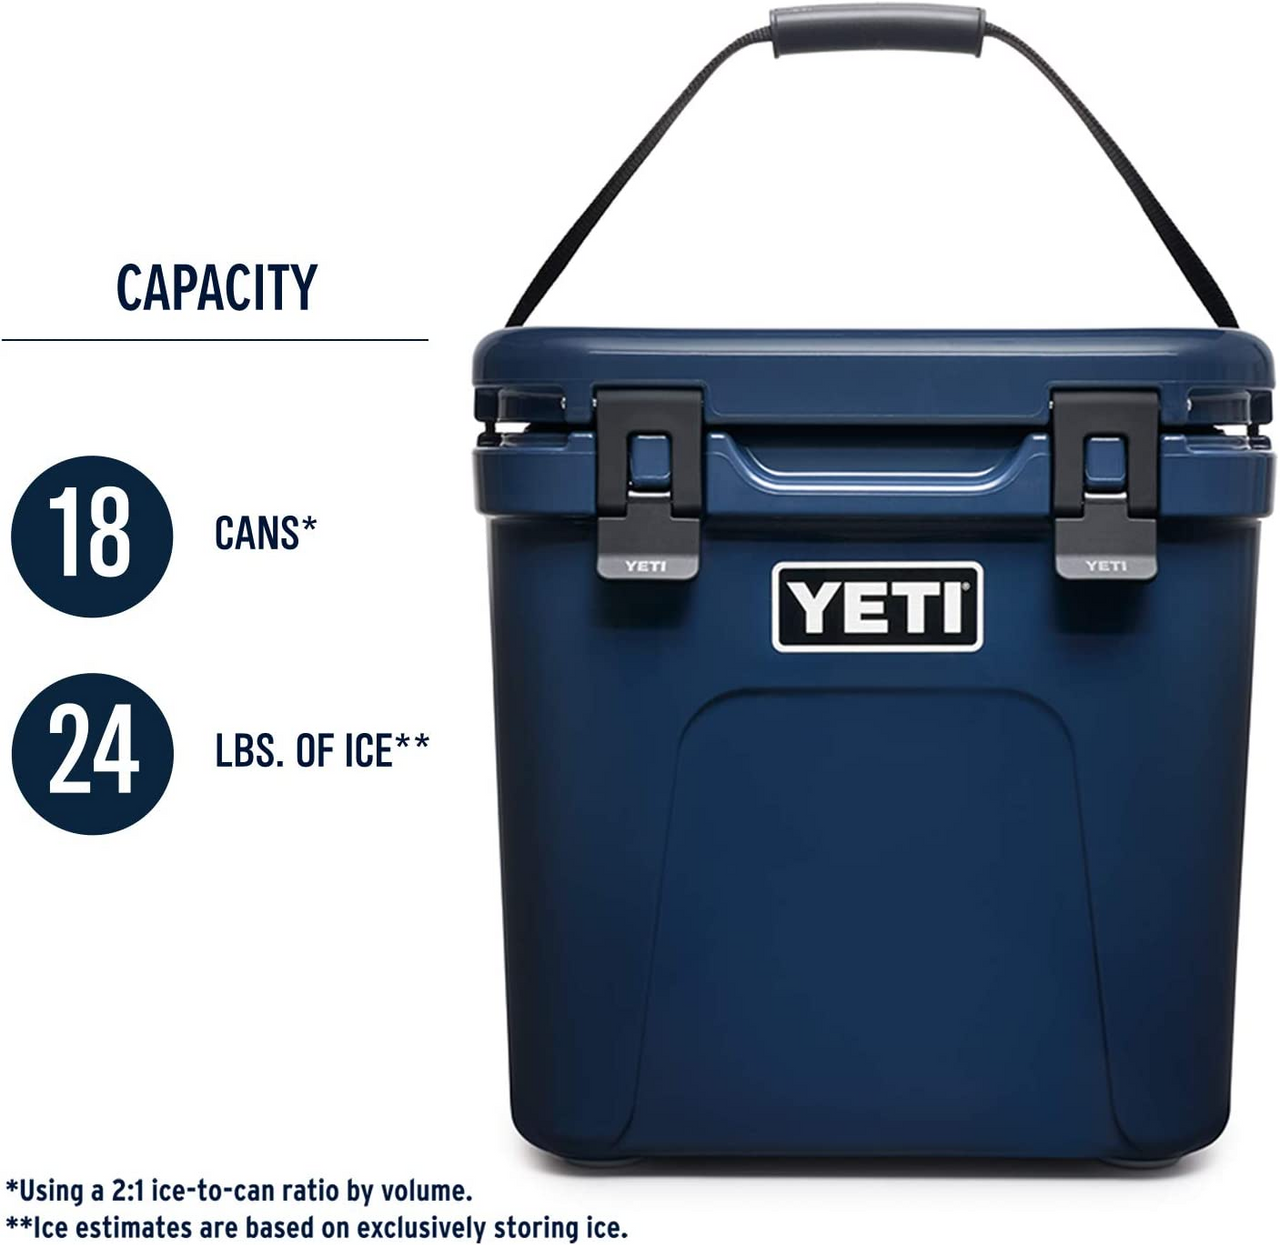 https://cdn11.bigcommerce.com/s-mkx5msl2io/images/stencil/1280x1280/products/11261/63395/Yeti-Roadie-24-Navy-10022010000__S_3__84921.1674252530.png?c=1&imbypass=on